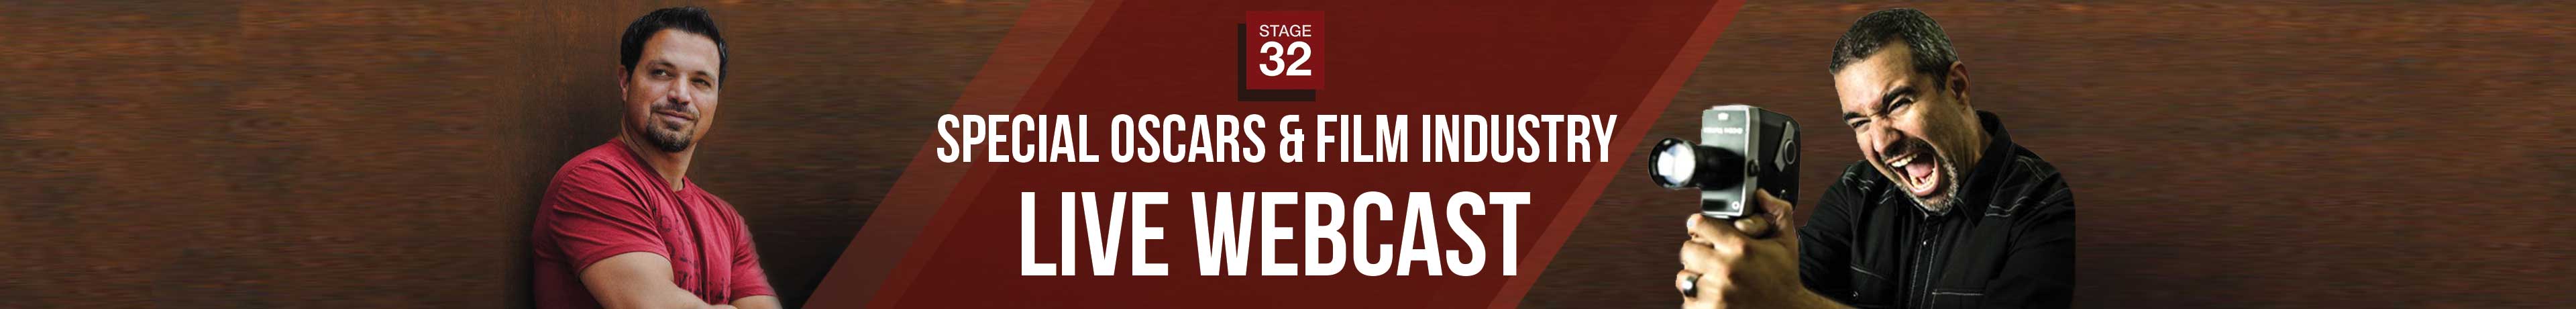 Special Oscars & Film Industry Live Webcast